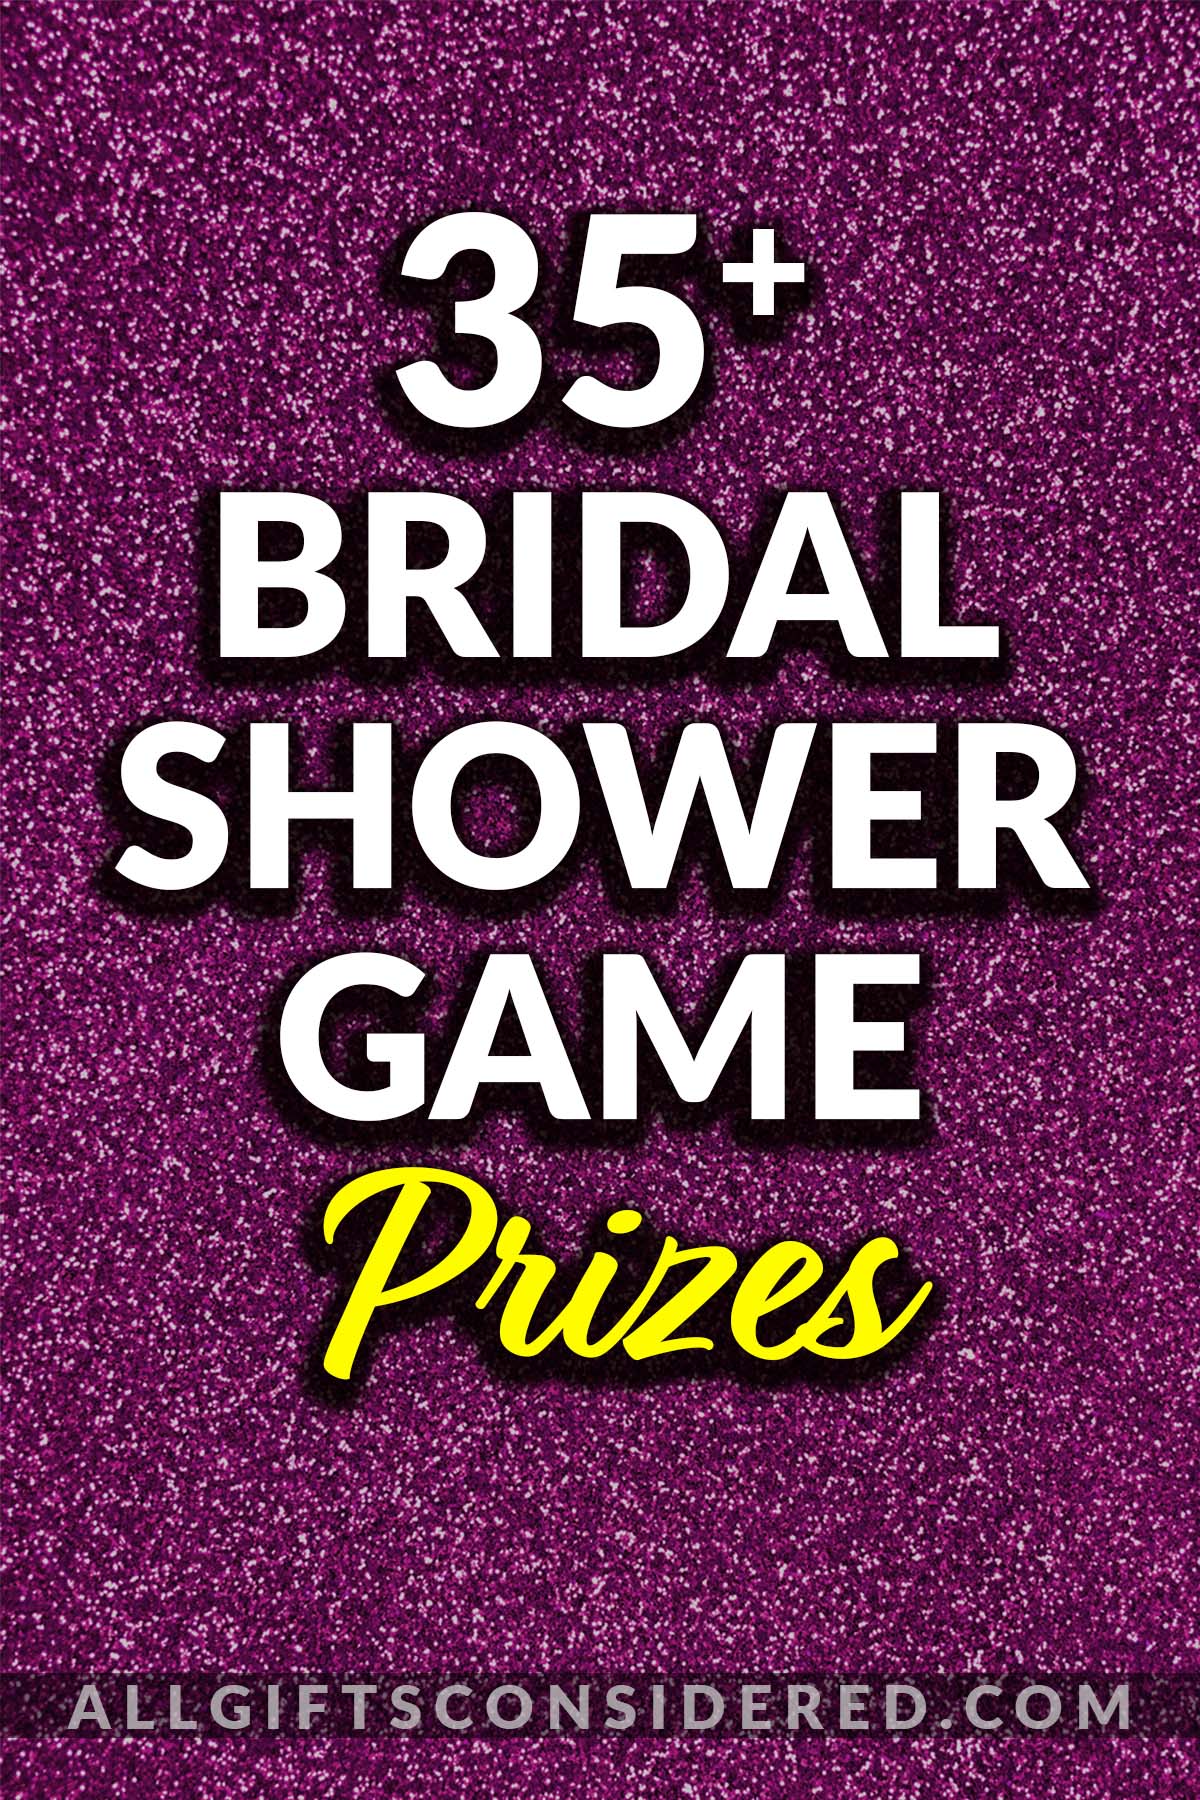 bridal shower game prizes - Feat Image